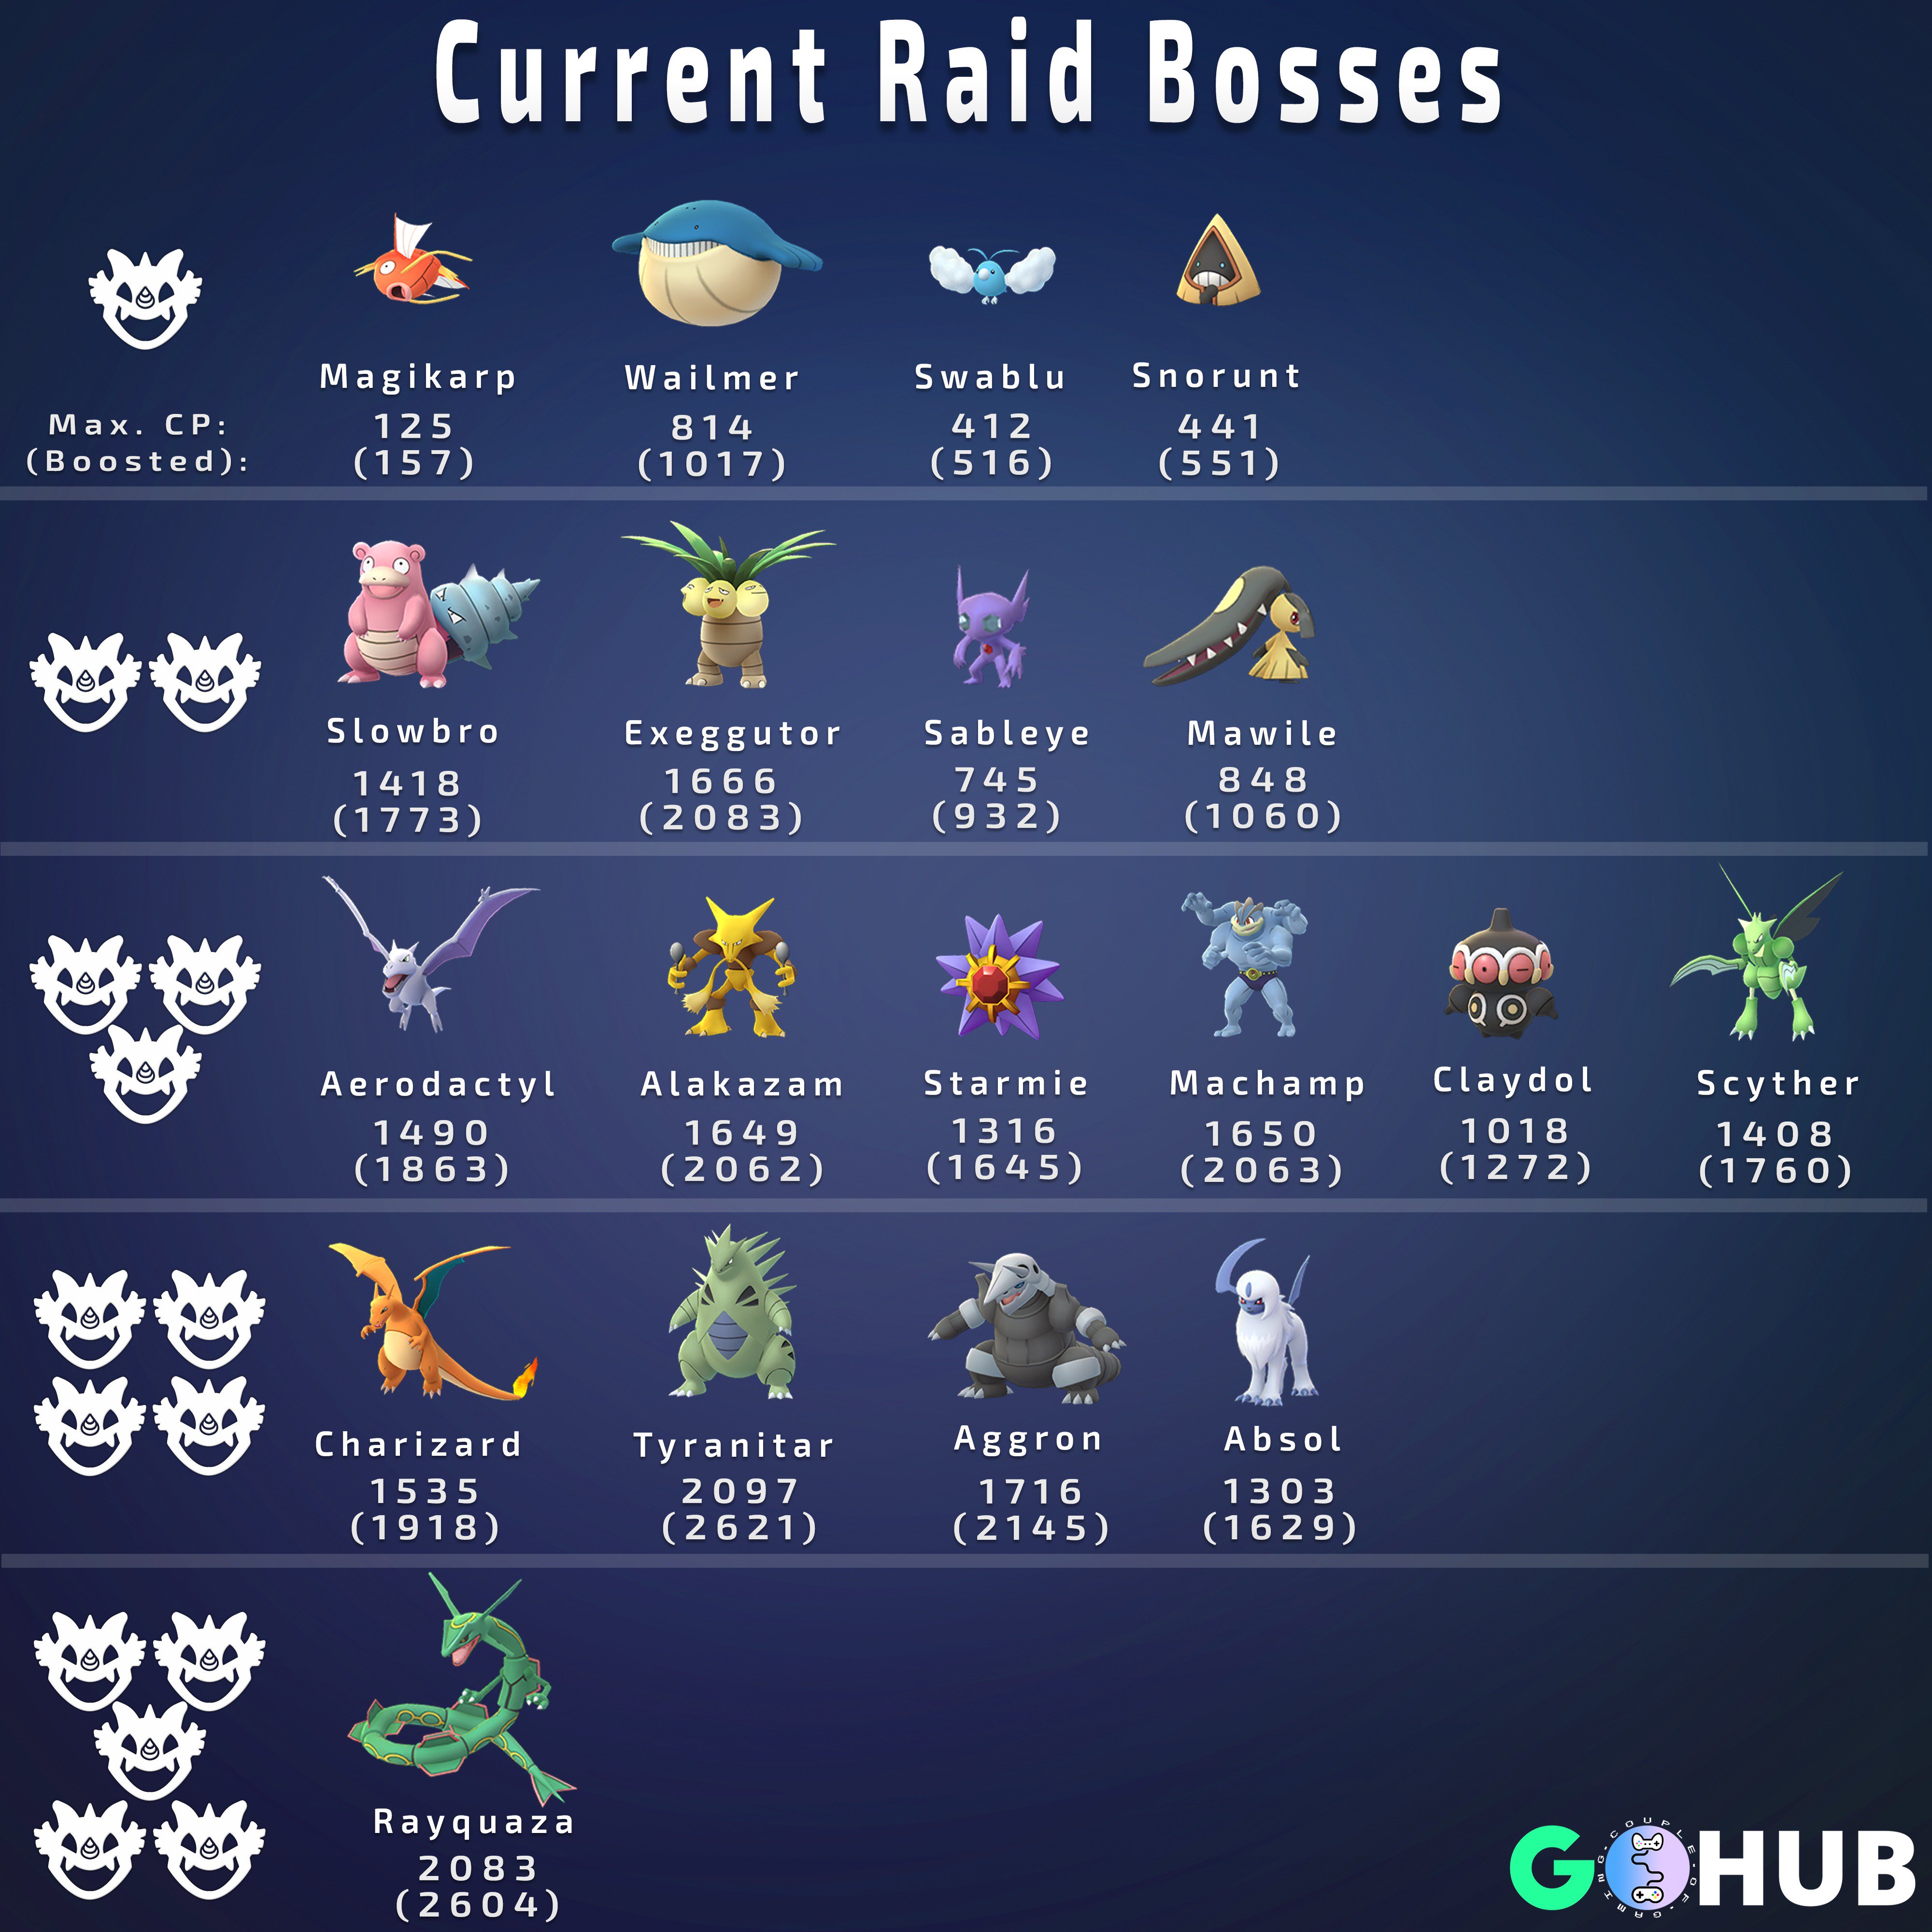 Pokémon GO on Twitter: our official infographic guide to new raid bosses is proudly designed in collaboration with Couple Of Gaming! Text version: https://t.co/SpyAtlm2D1 https://t.co/OcxKirZxlW" / Twitter